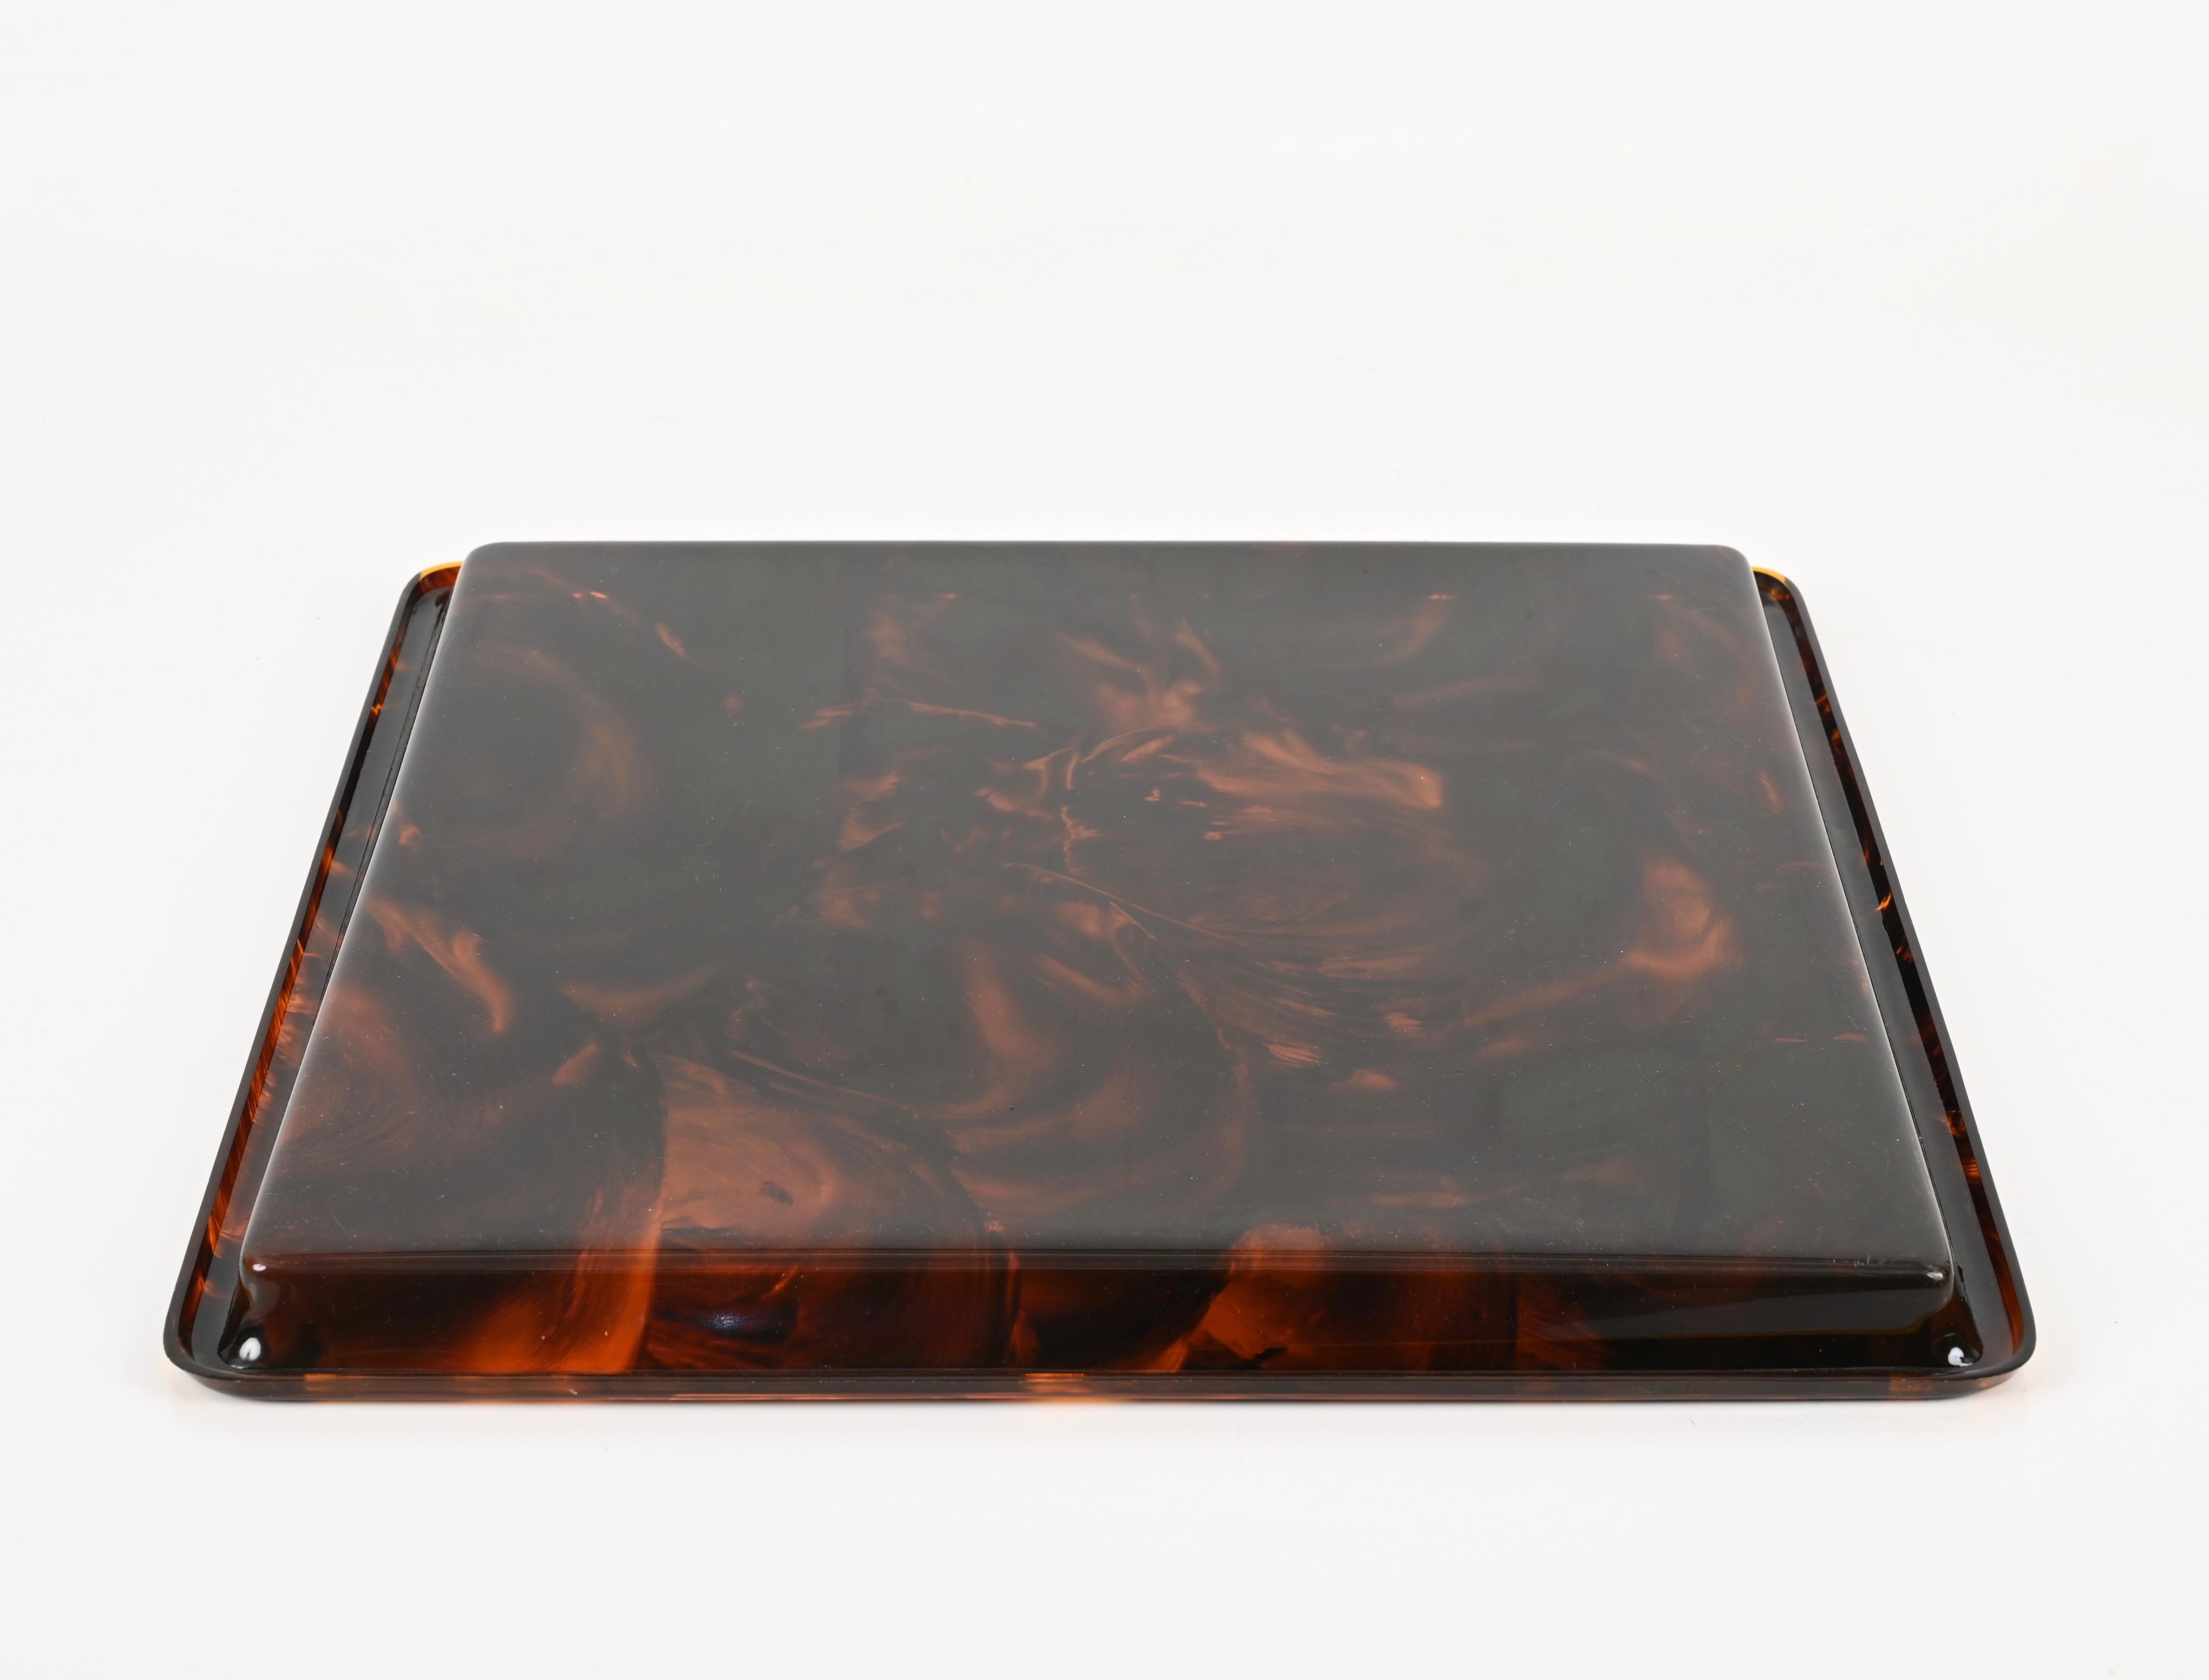 Christian Dior Square Tortoiseshell Effect Lucite Serving Tray, Italy 1970s For Sale 5